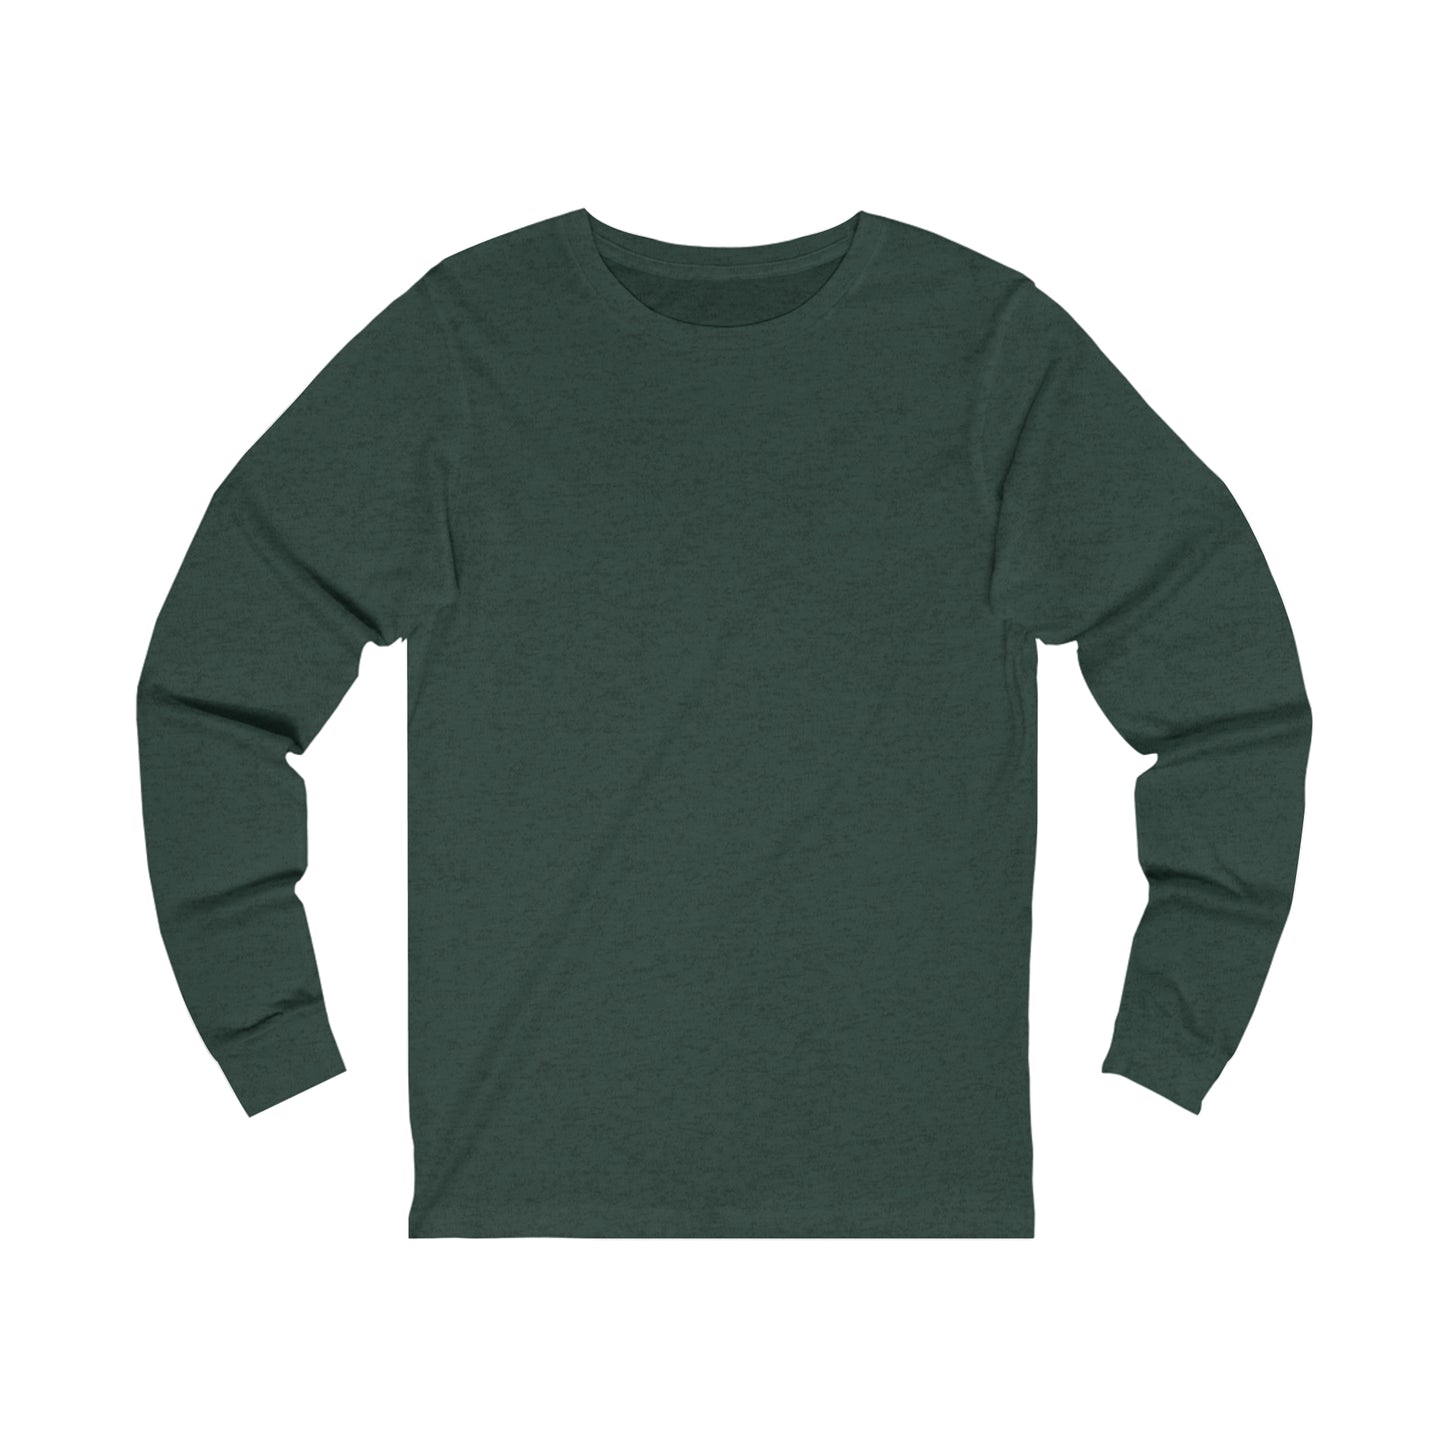 Blue Mountain Forest on Back Long Sleeve Tee